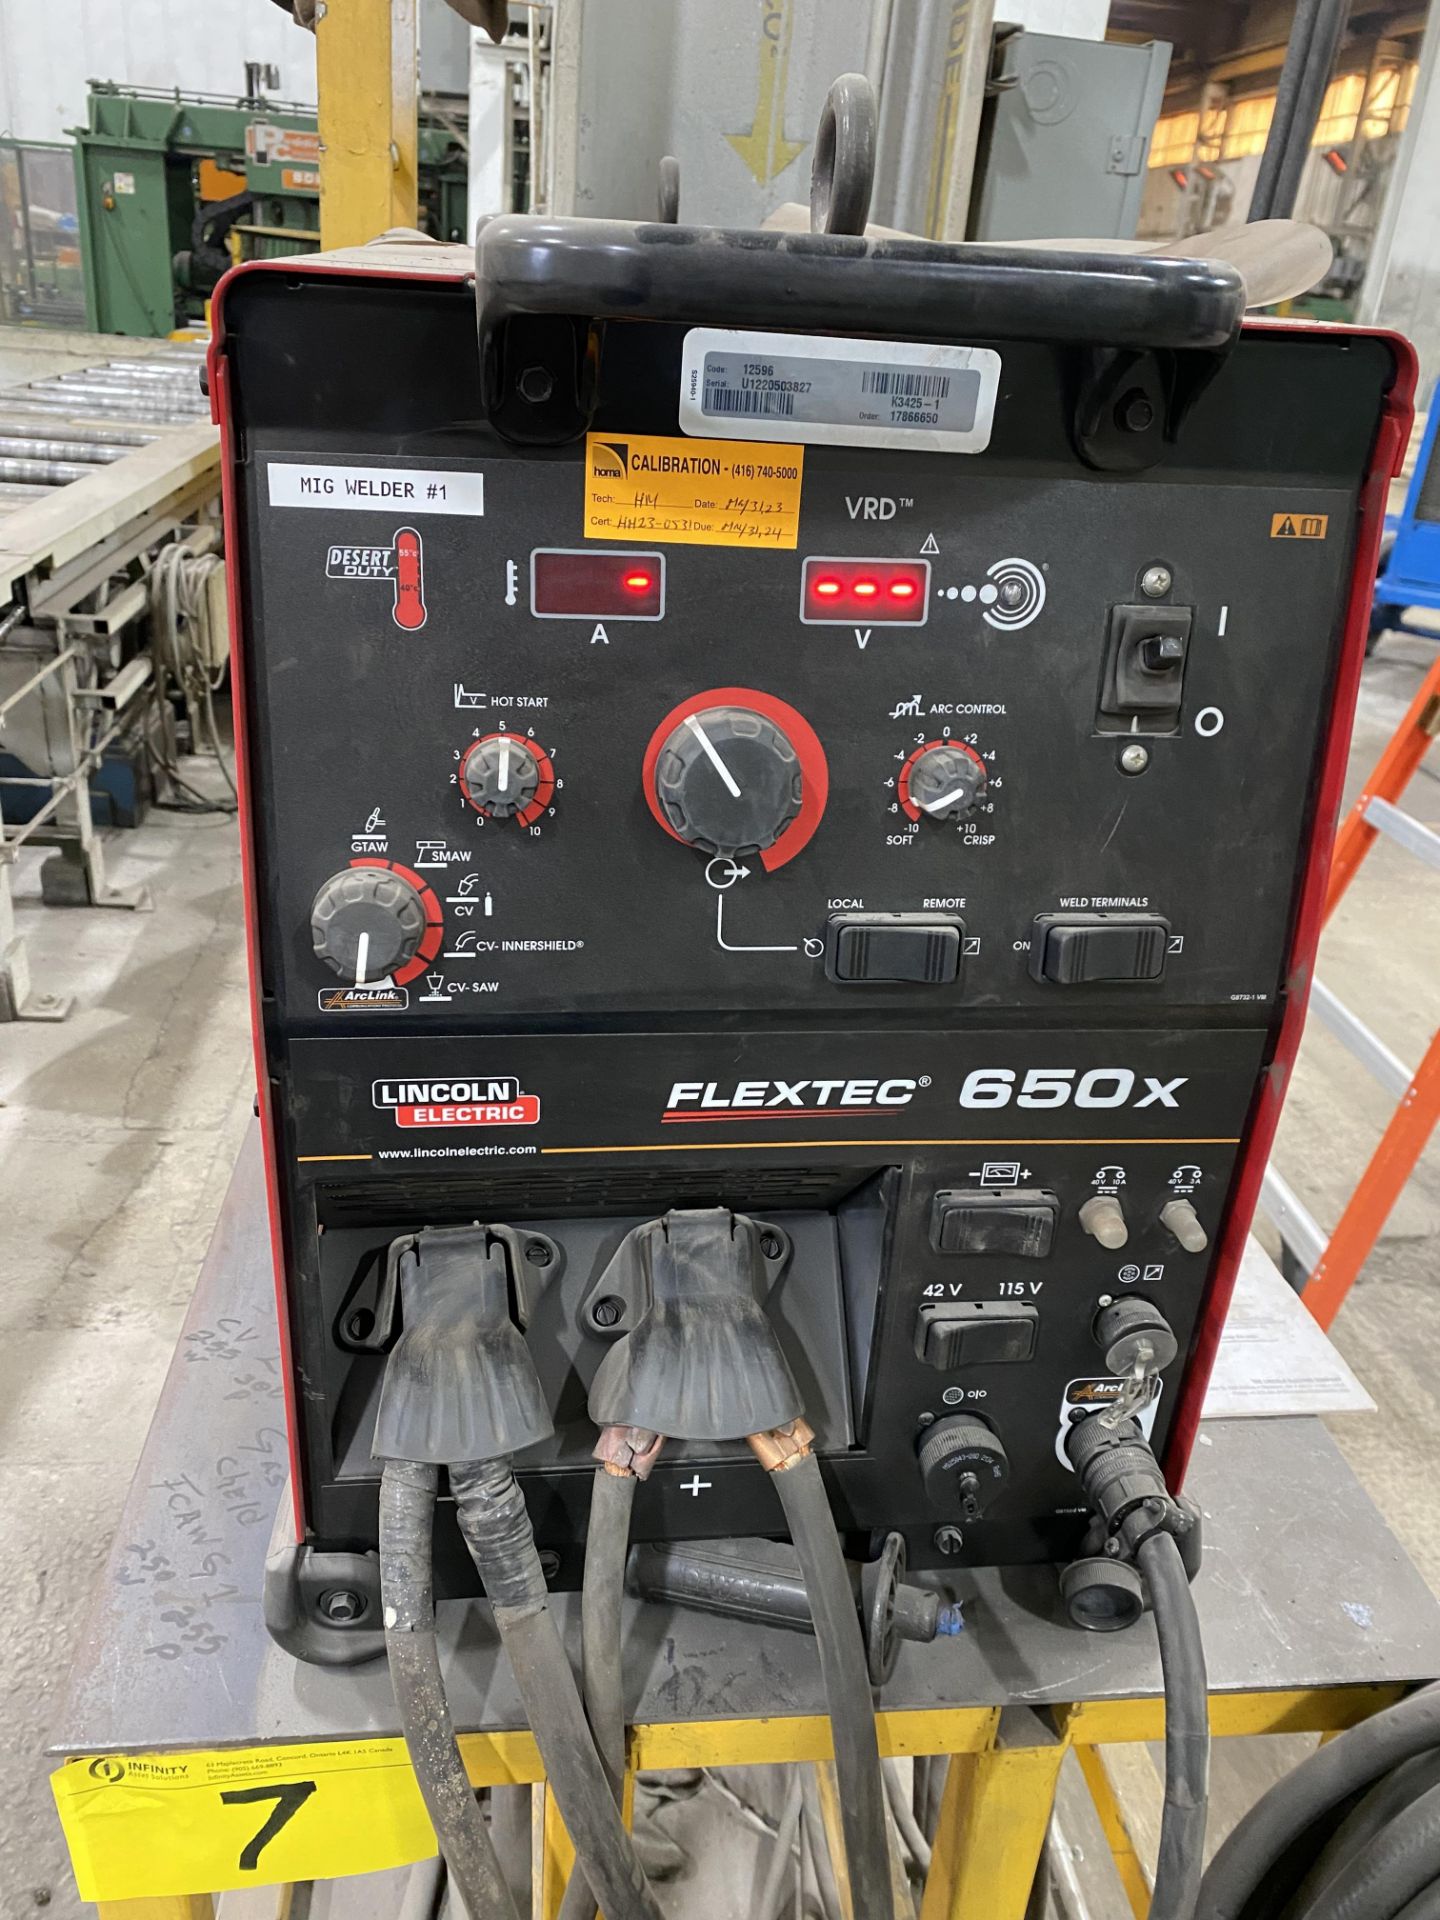 LINCOLN ELECTRIC FLEXTEC 650X MIG WELDER W/ LINCOLN ELECTRIC DLF-82 WIRE FEEDER, CABLES, STAND - Image 2 of 5